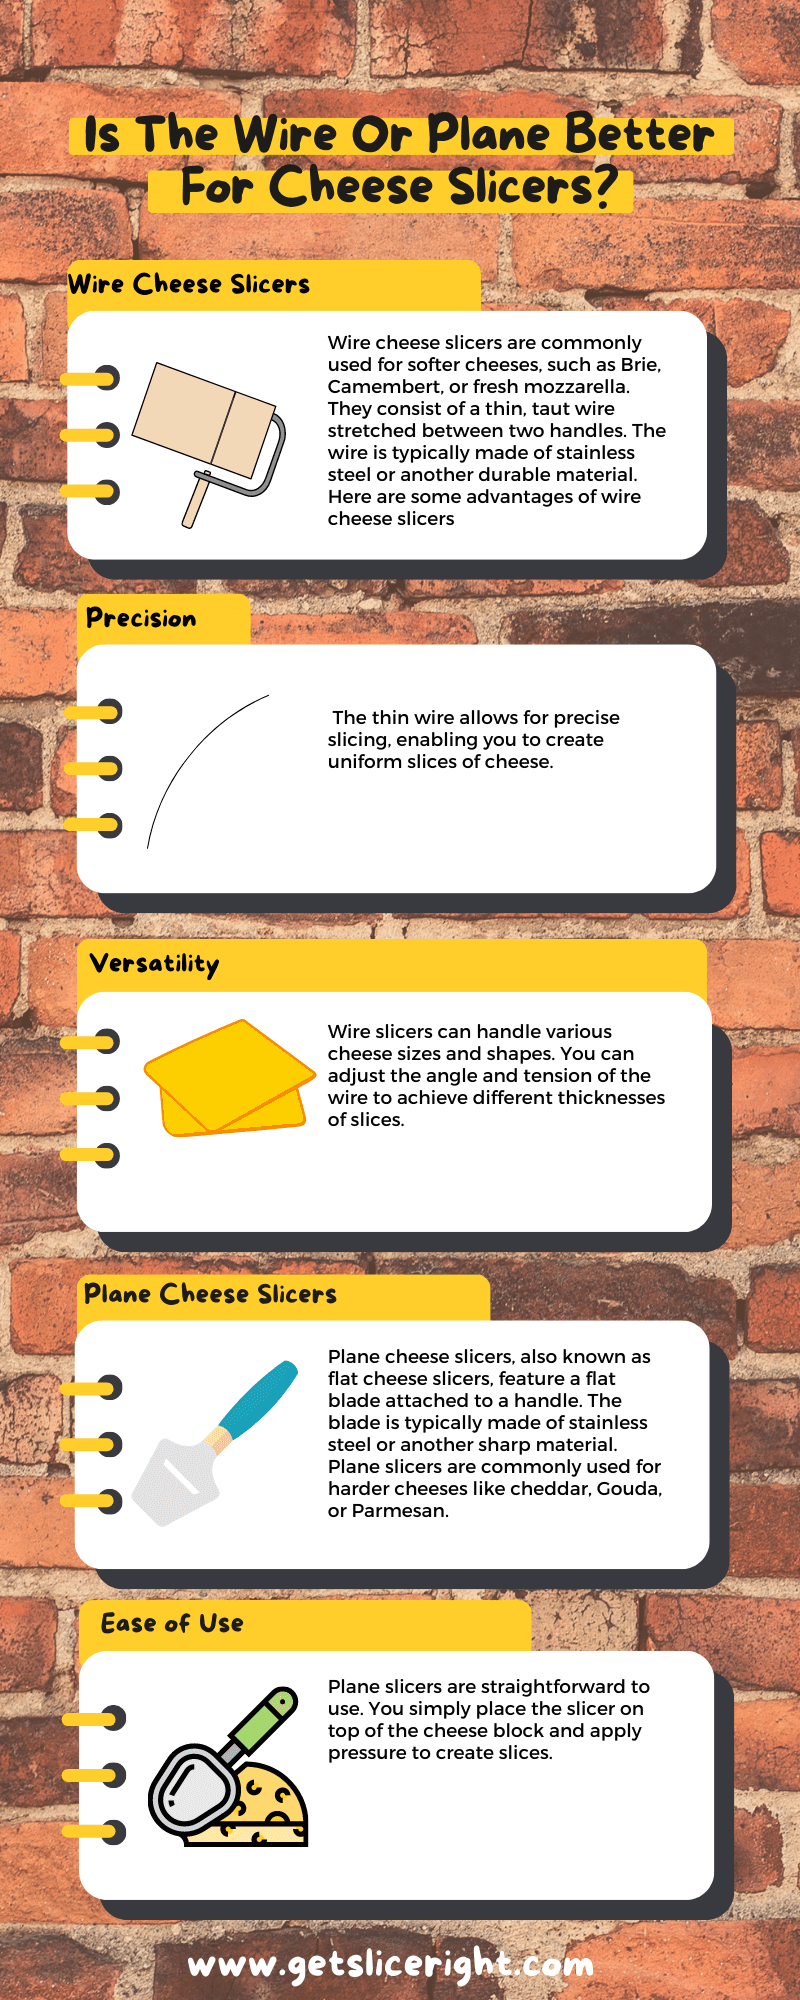 Is The Wire Or Plane Better For Cheese Slicers - Infographics